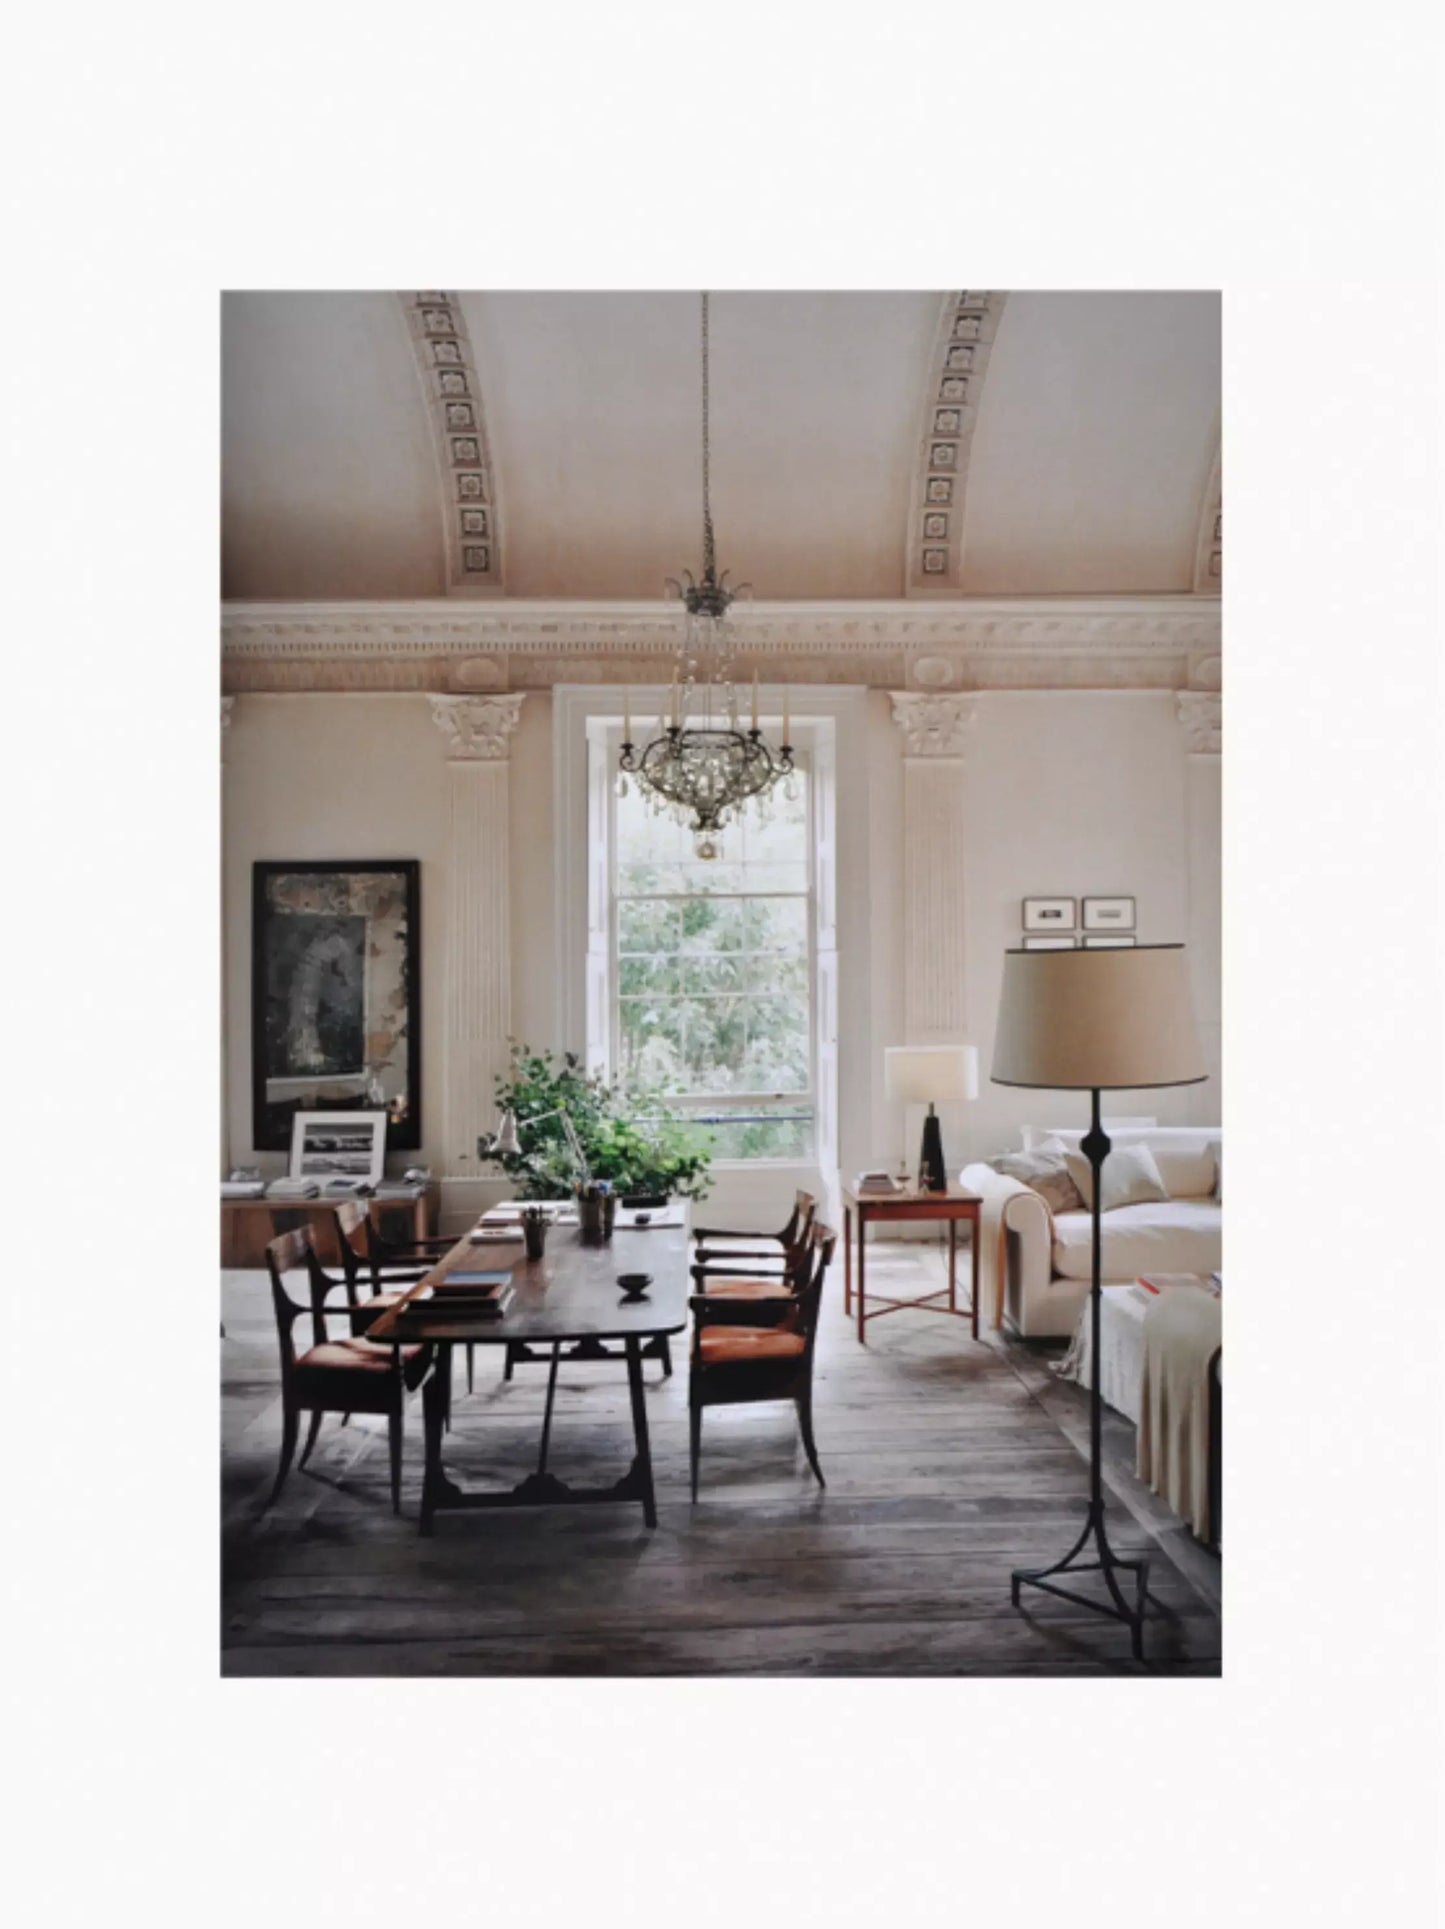 Rose Uniacke at Work Coffee Table Book